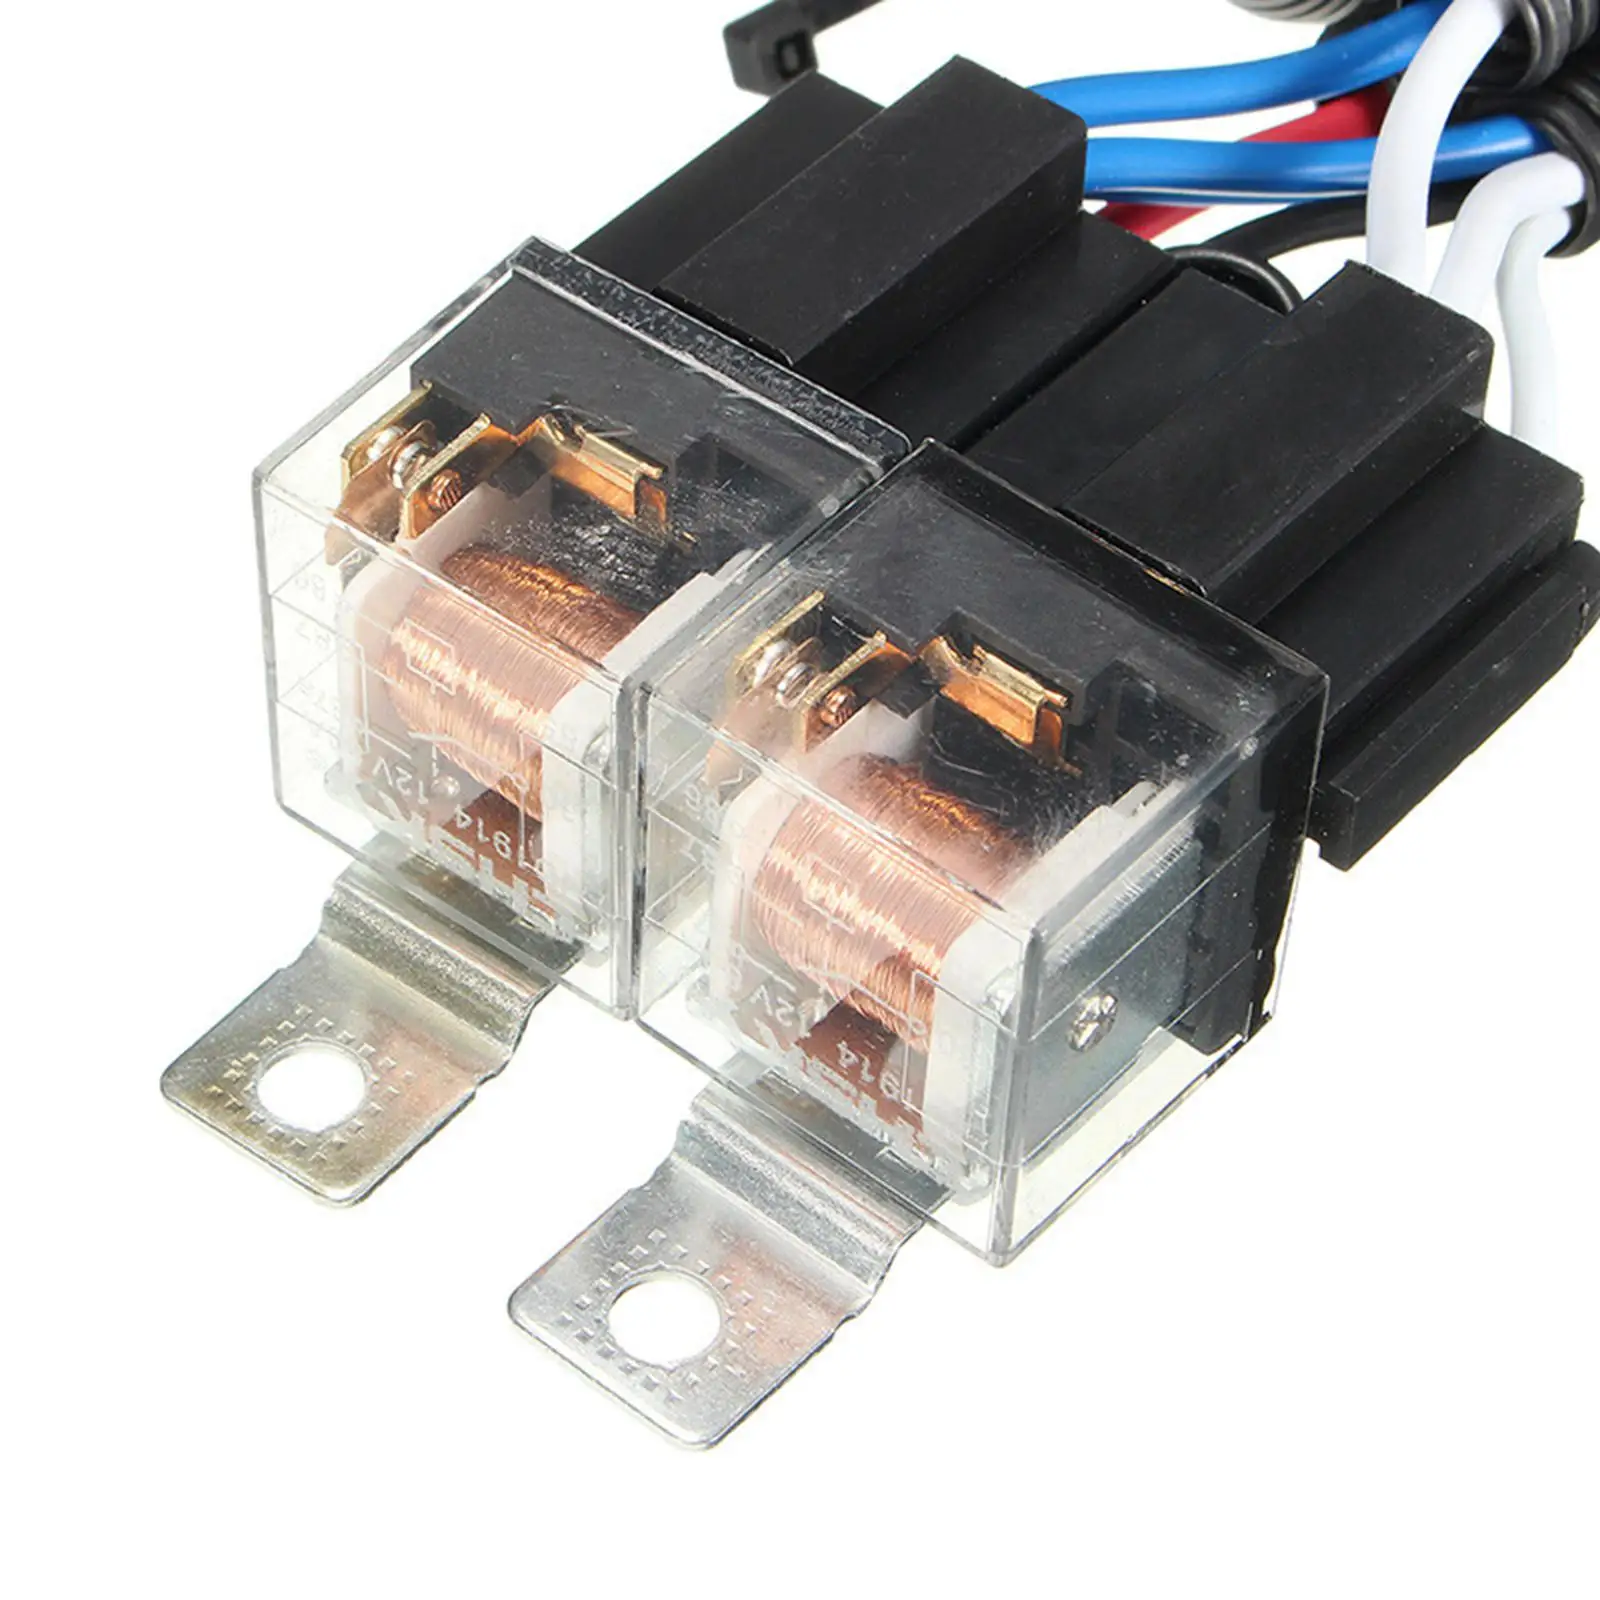 Vehicle H4 Headlight Relay Harness Replacement Easy Installation